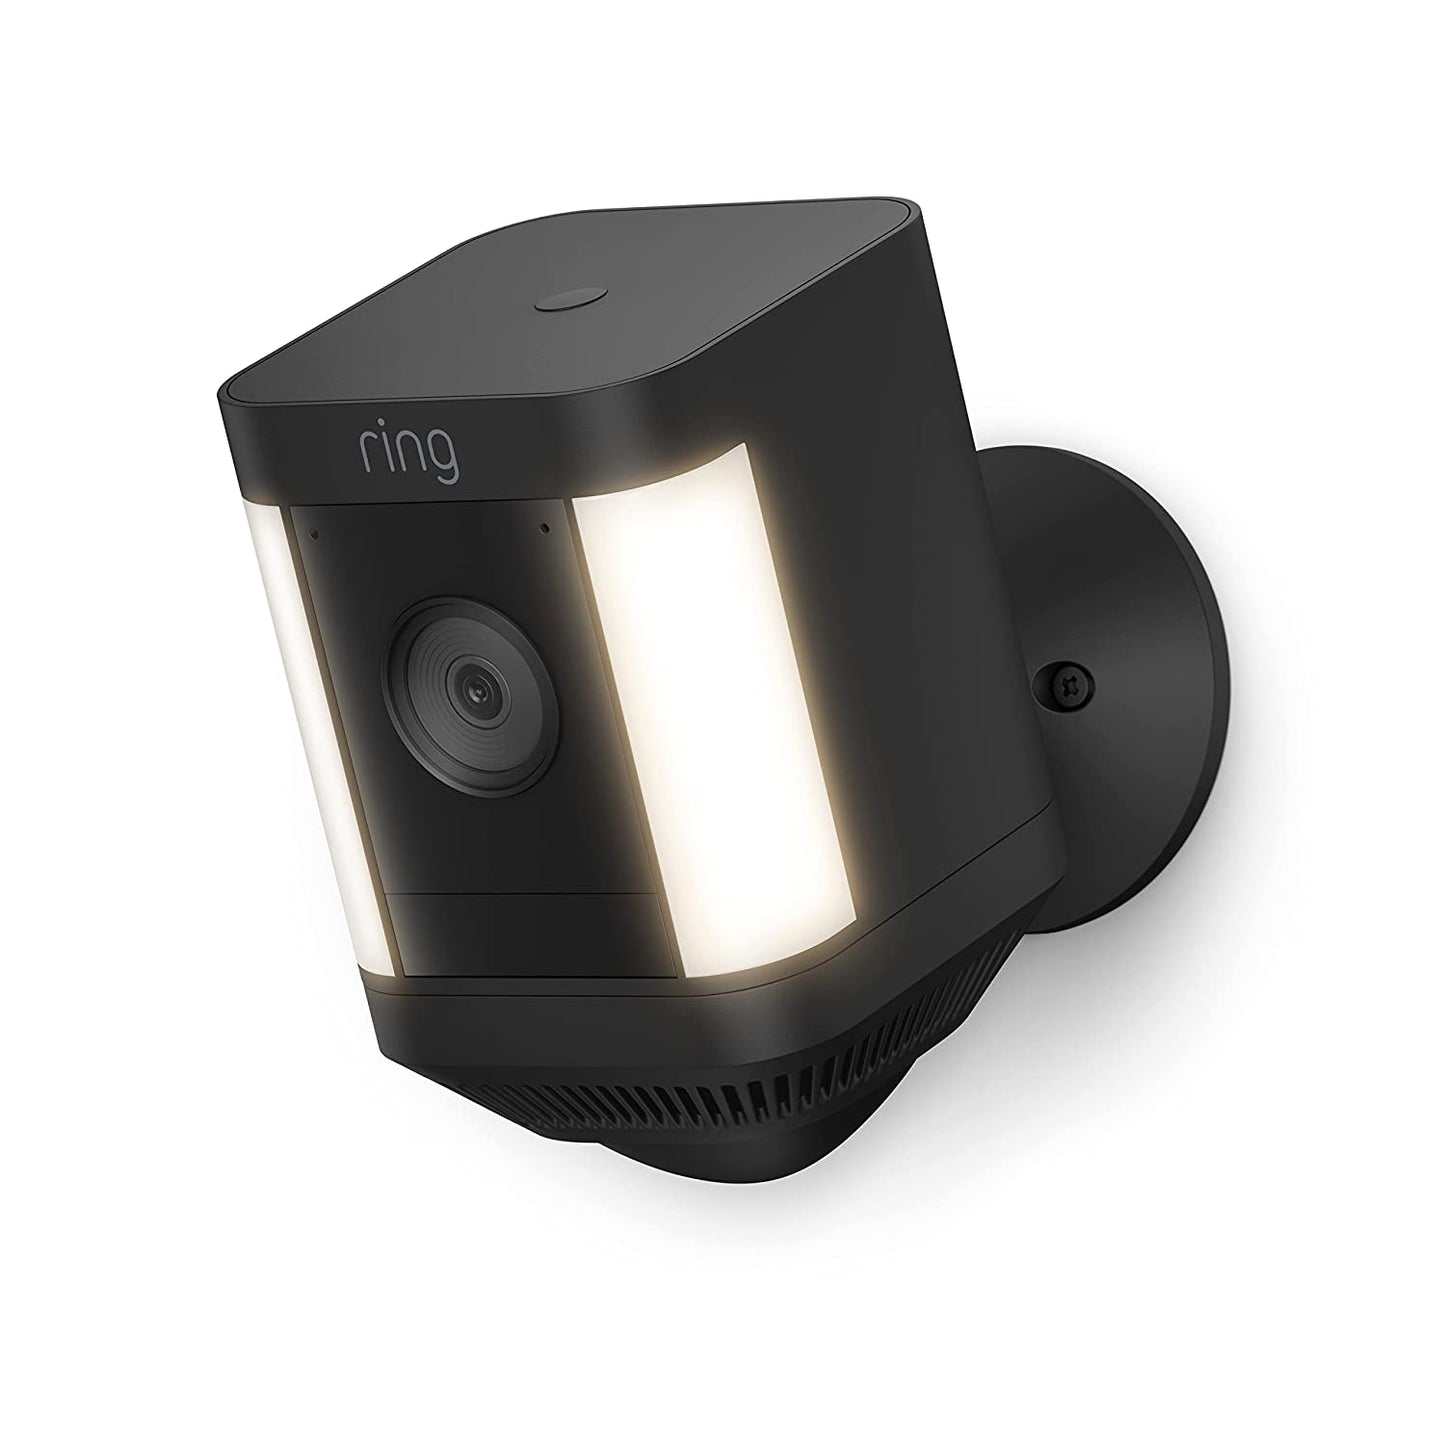 Introducing Rng Spotlight Cam Plus, Battery | Two-Way Talk, Color Night Vision, and Security Siren (2022 release) - Black